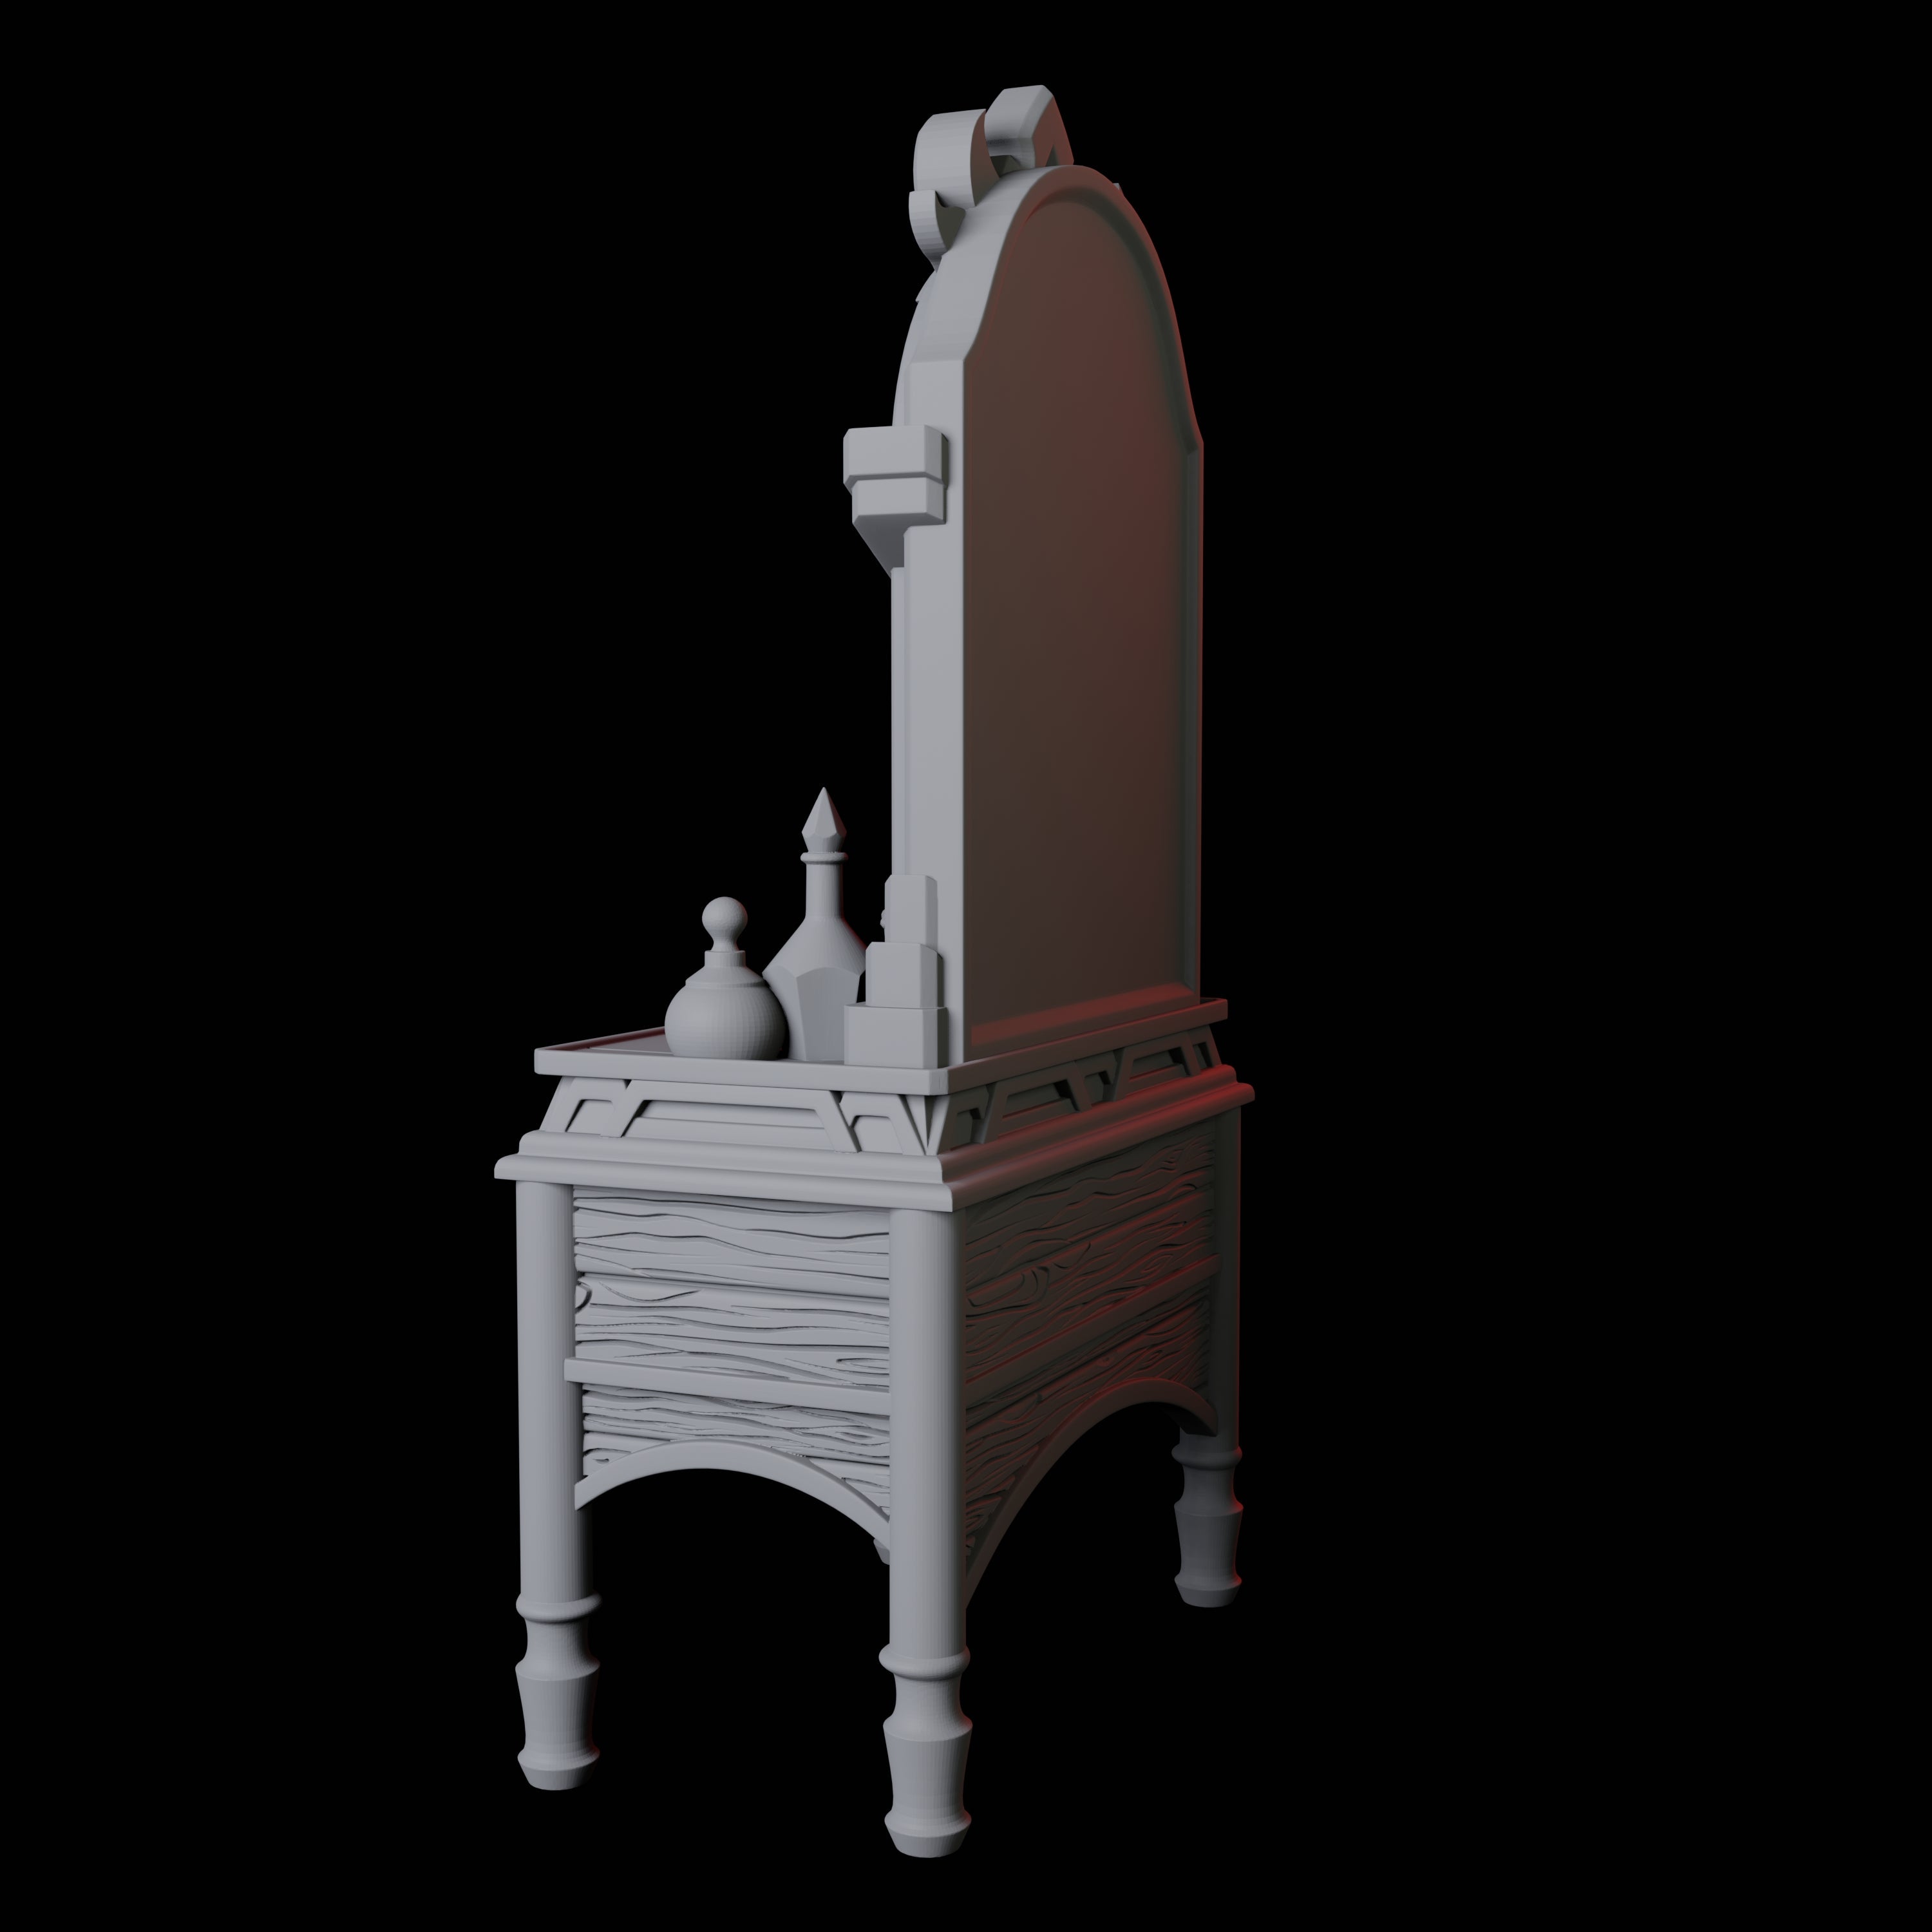 Dressing Table Miniature for Dungeons and Dragons, Pathfinder or other TTRPGs